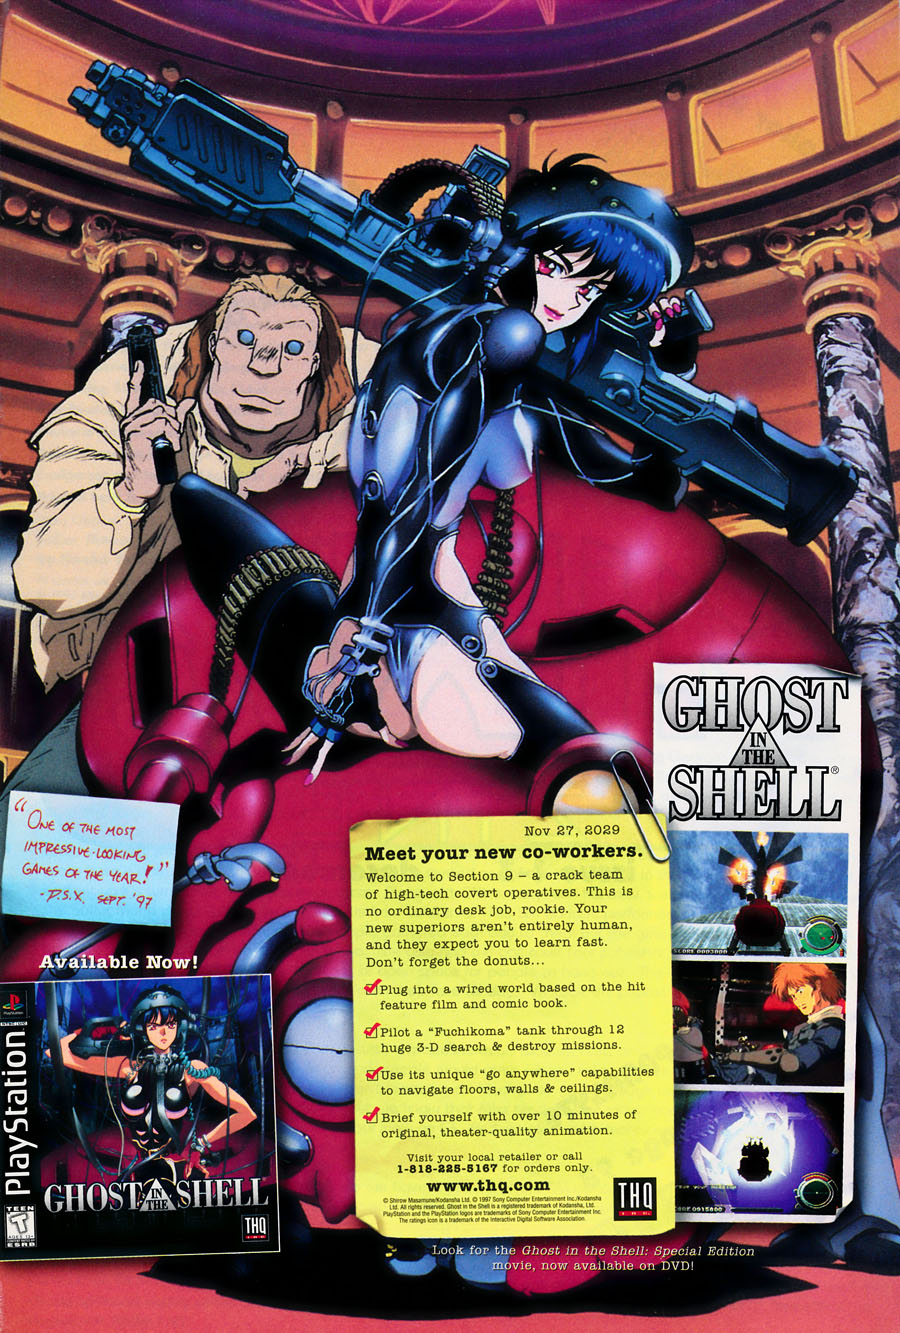 Ghost-in-the-shell-playstation-console-video-game-THQ-Issue-3-December-1997